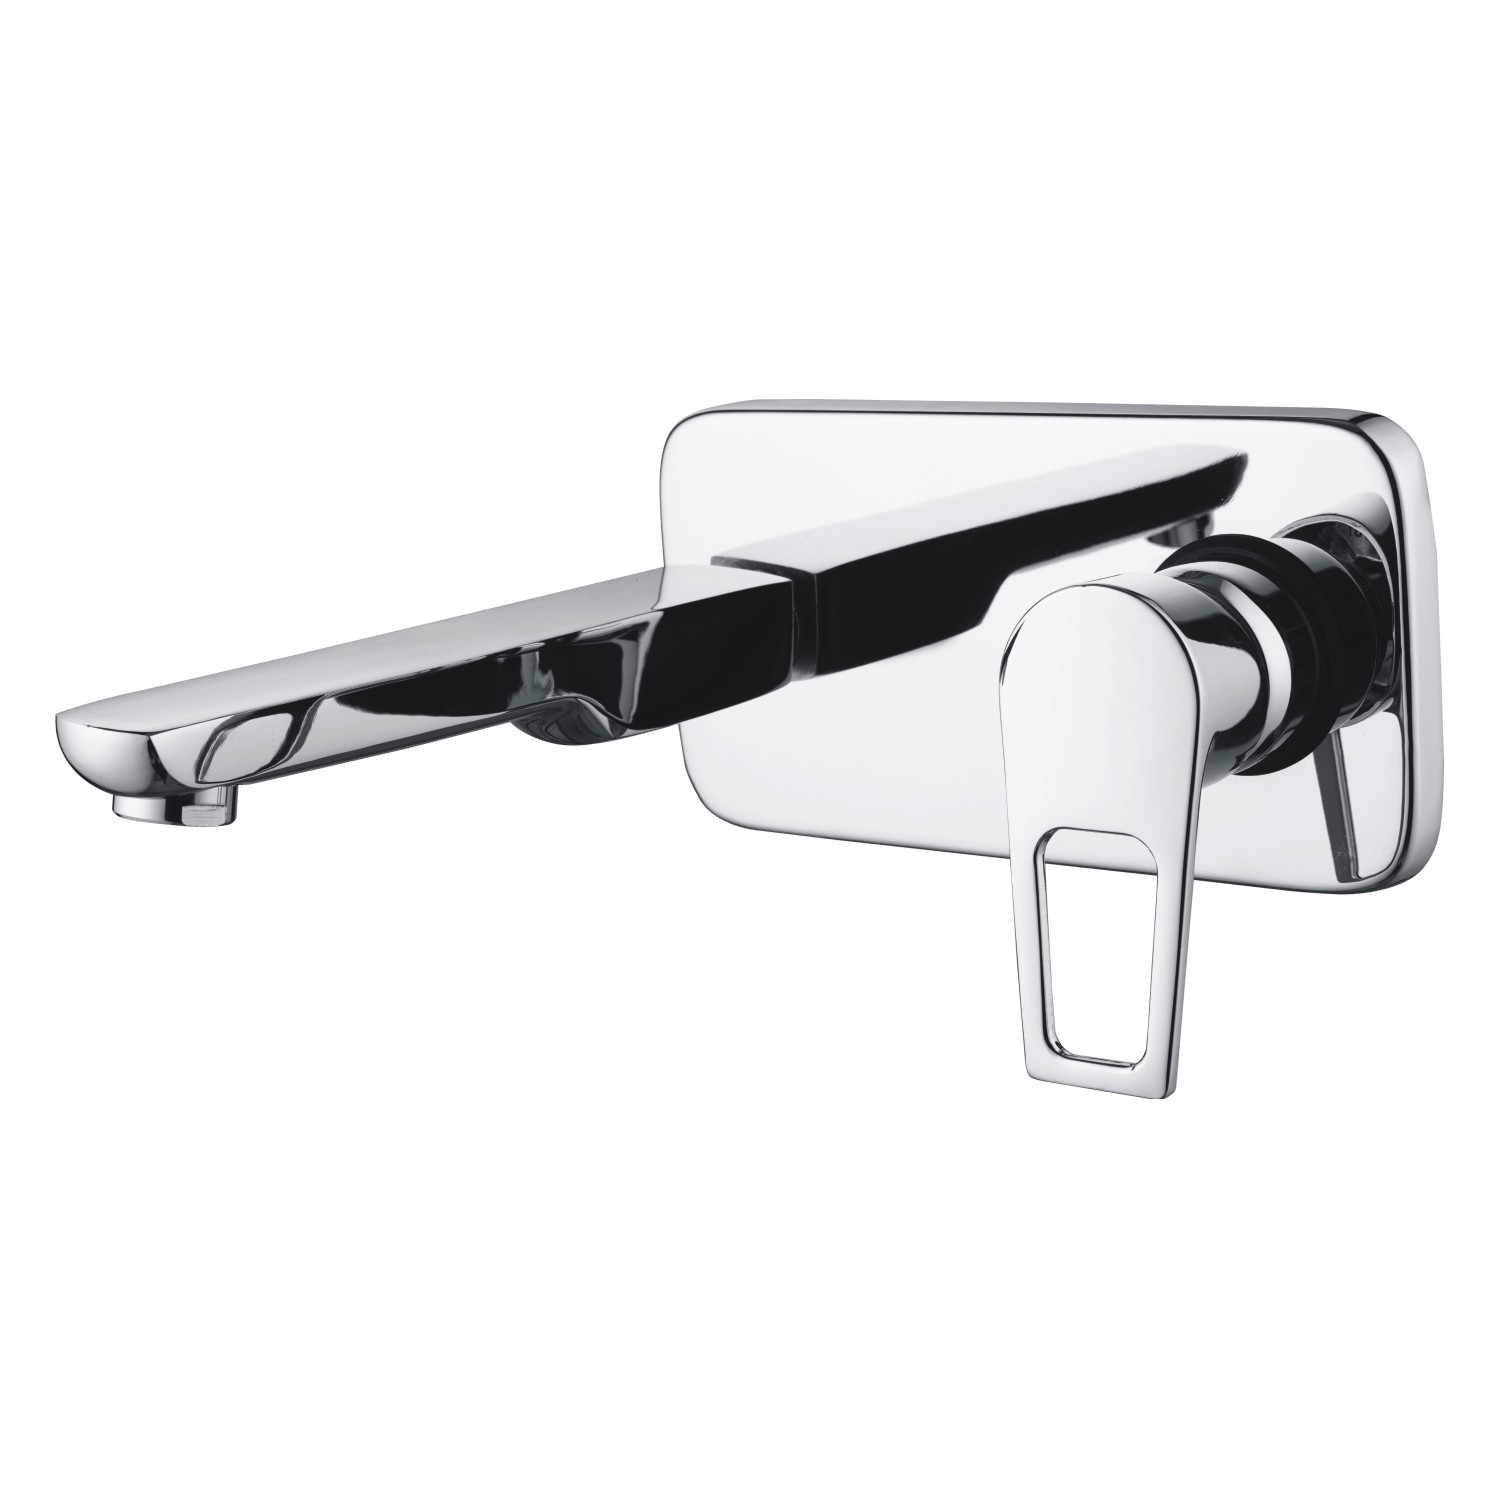 ASTRAL WALL MOUNTED SINGLE LEVER BASIN MIXER